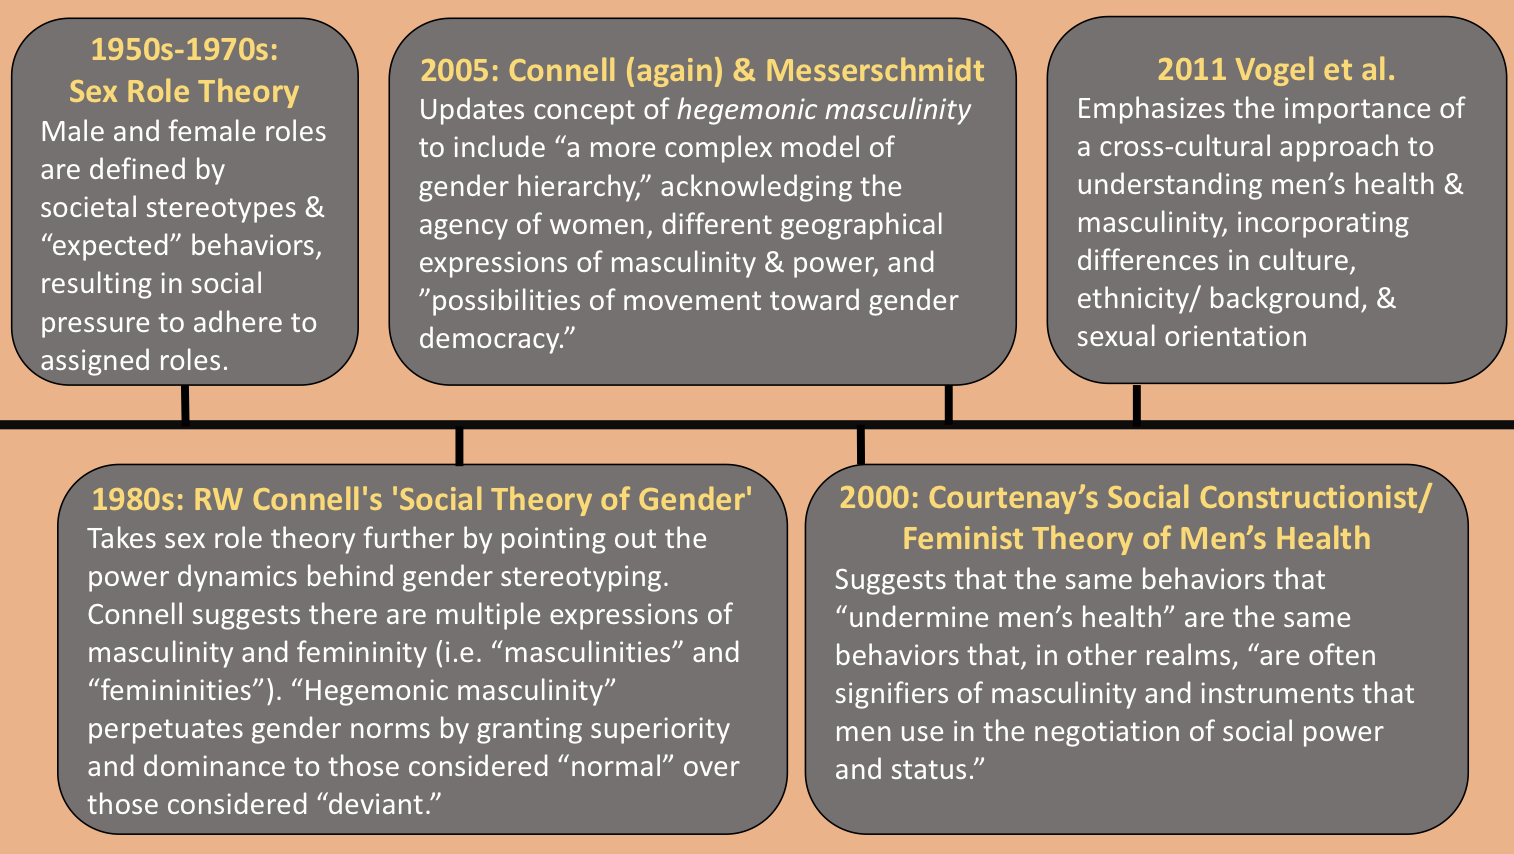 Timeline of masculinity and men's health